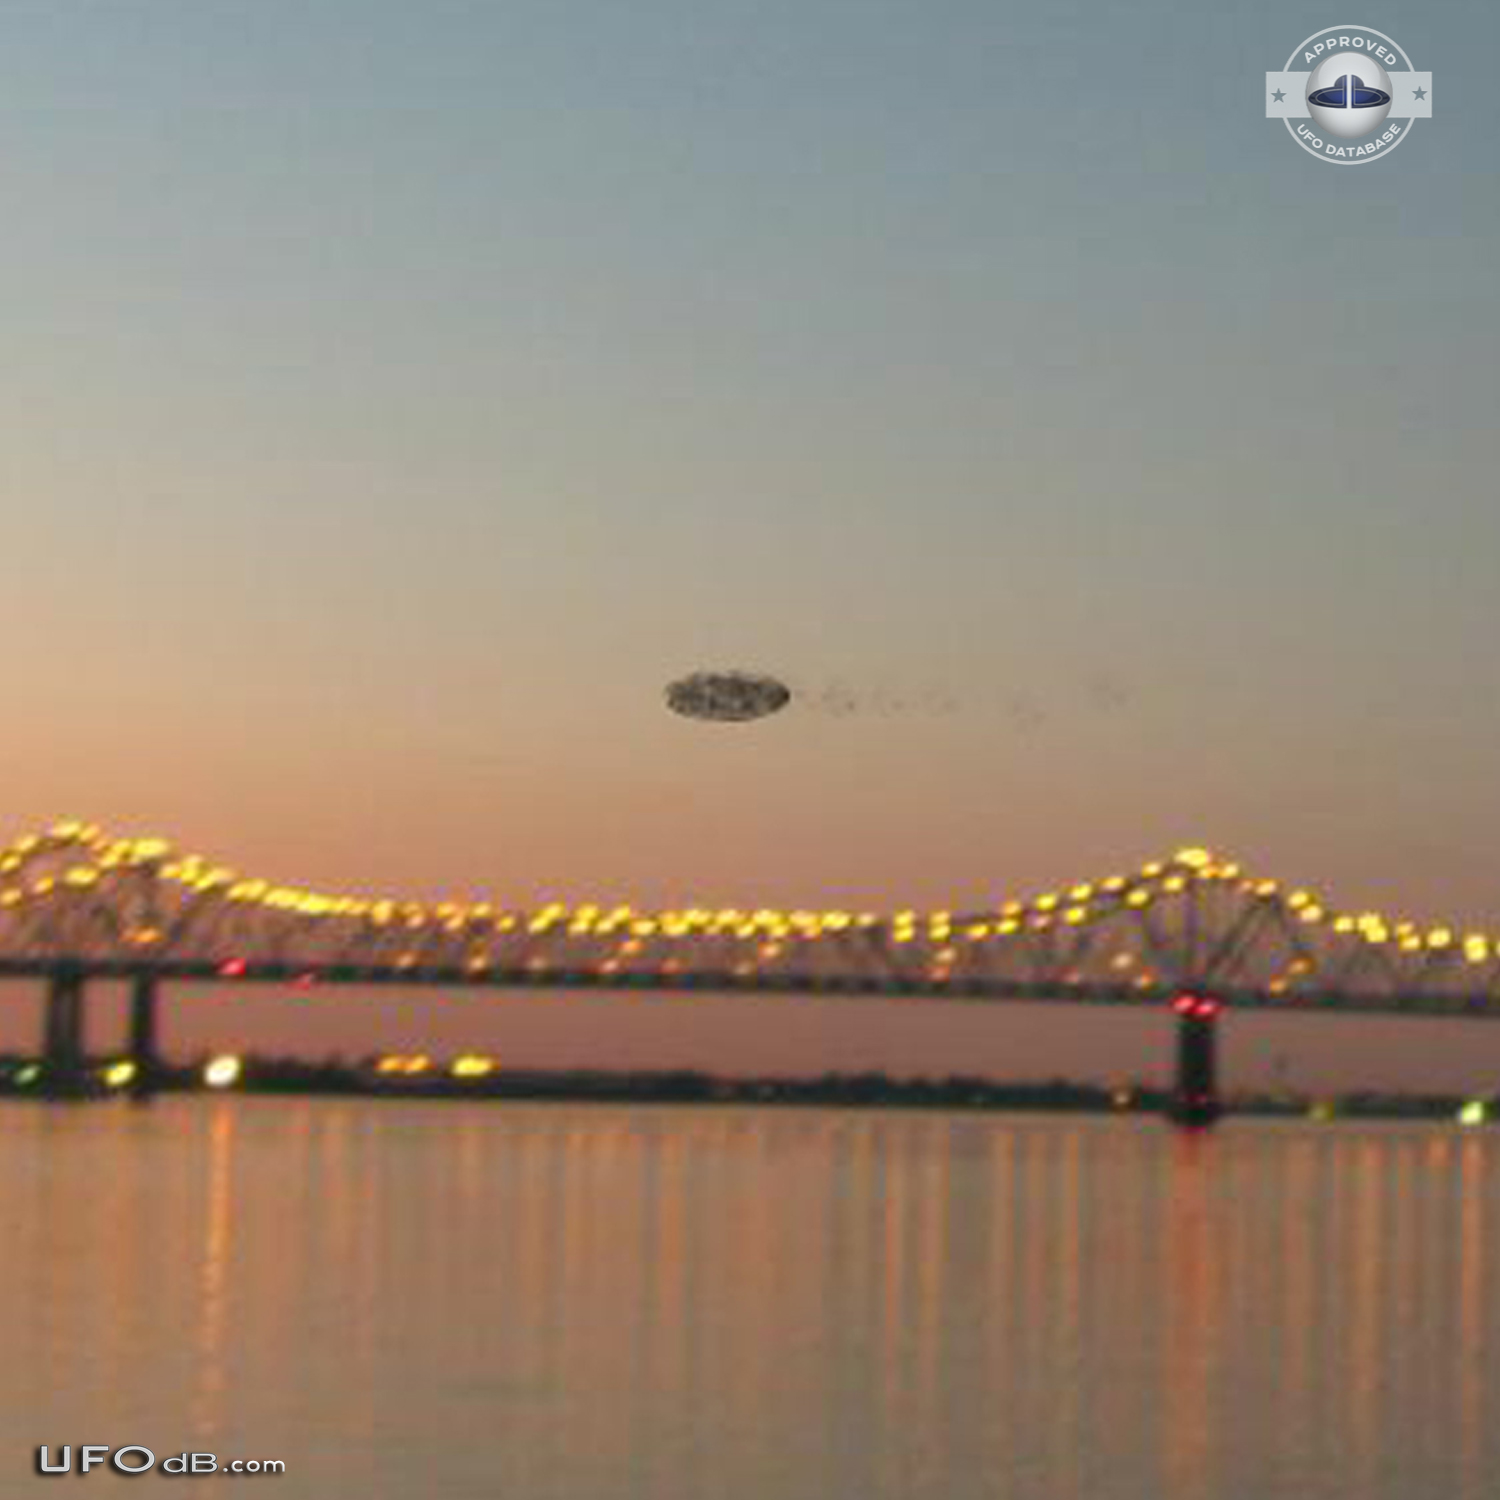 Dark shadowy disc UFO over the Mississippi New Orleans Louisiana 2012 UFO Picture #513-2